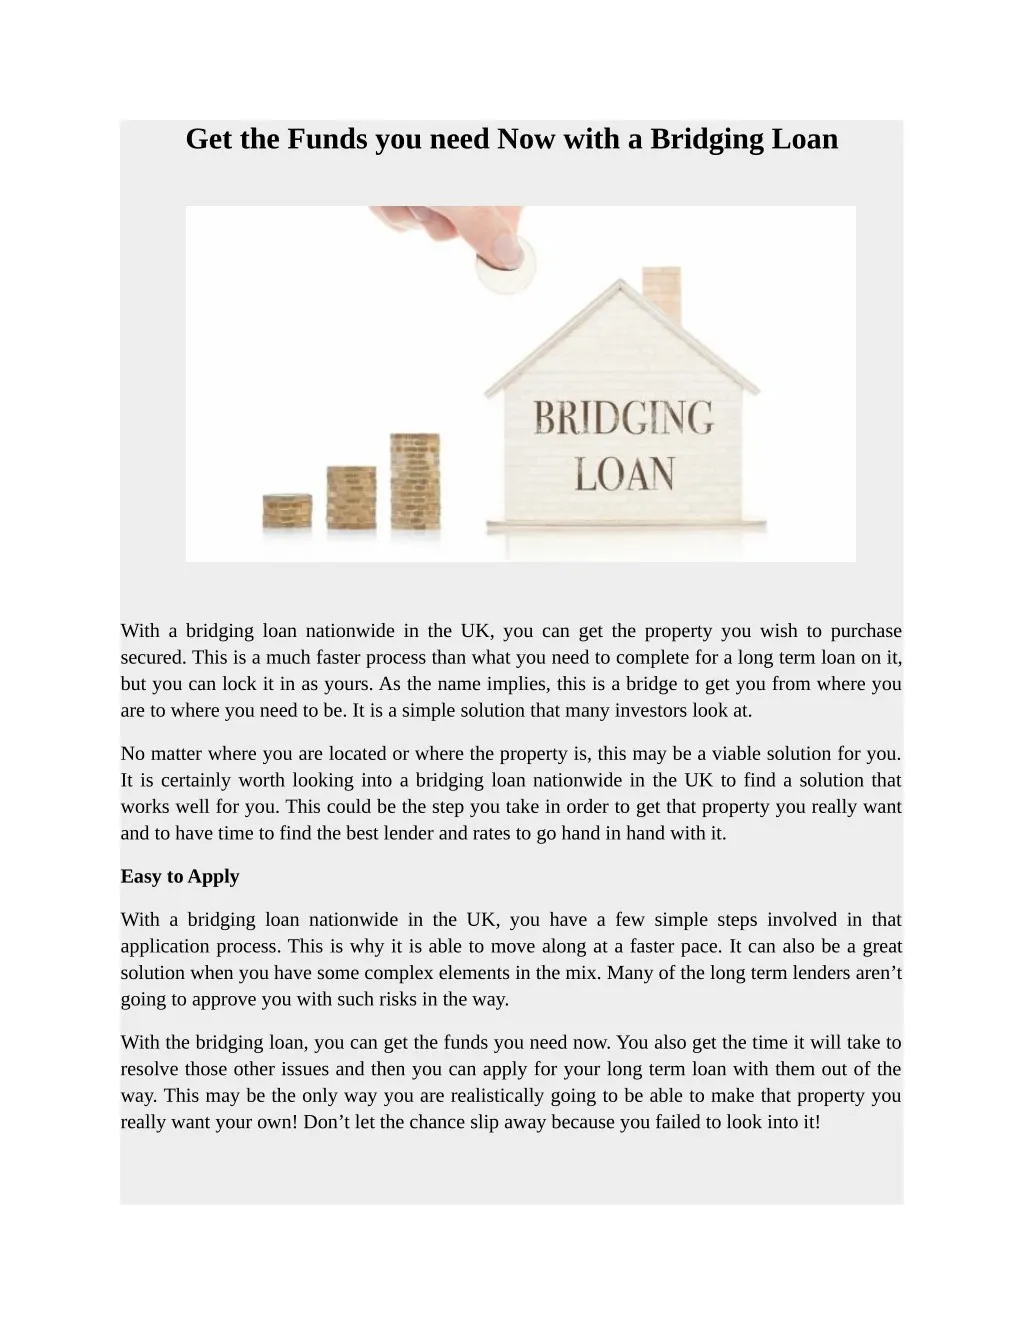 get the funds you need now with a bridging loan